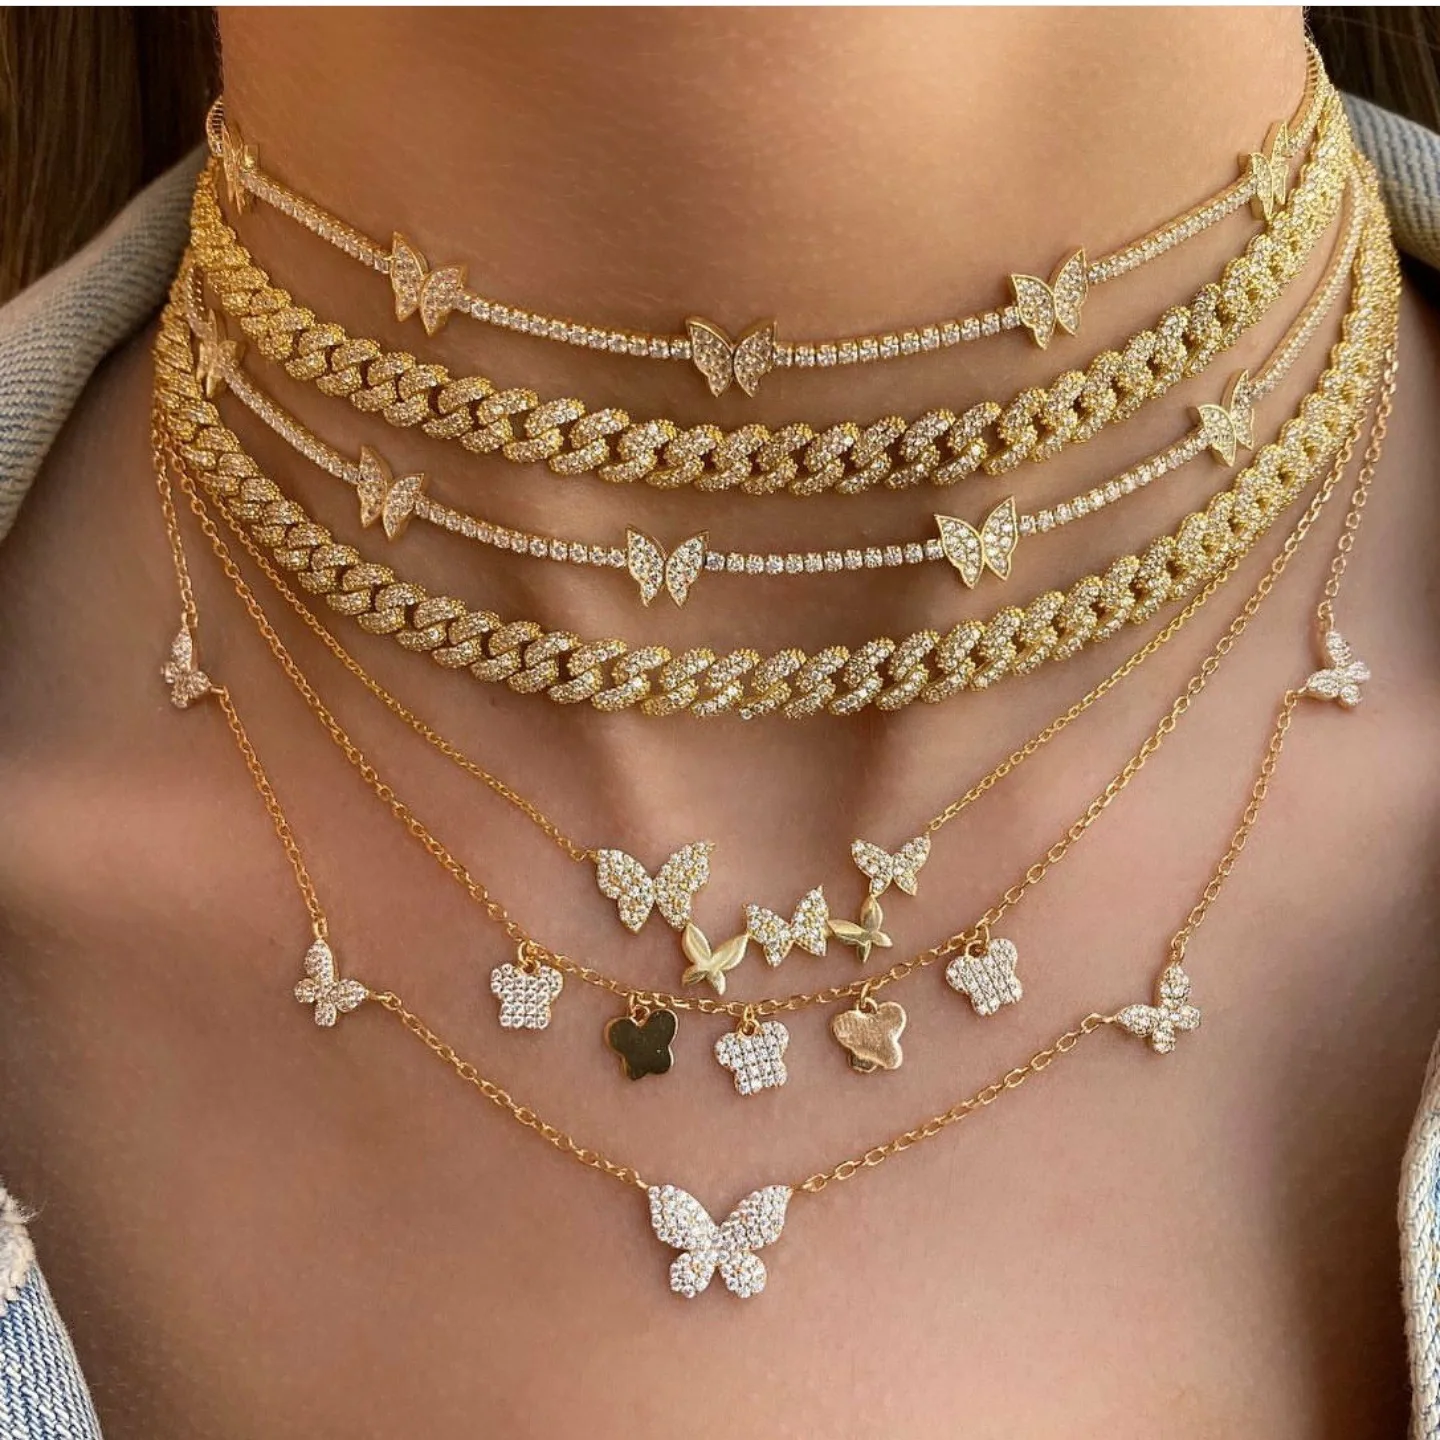 

Hotsale Women Sparkling Glitter Jewelry 18K Gold Plating Butterfly Choker Necklace Clavicle Chain Bling CZ Butterfly Necklace